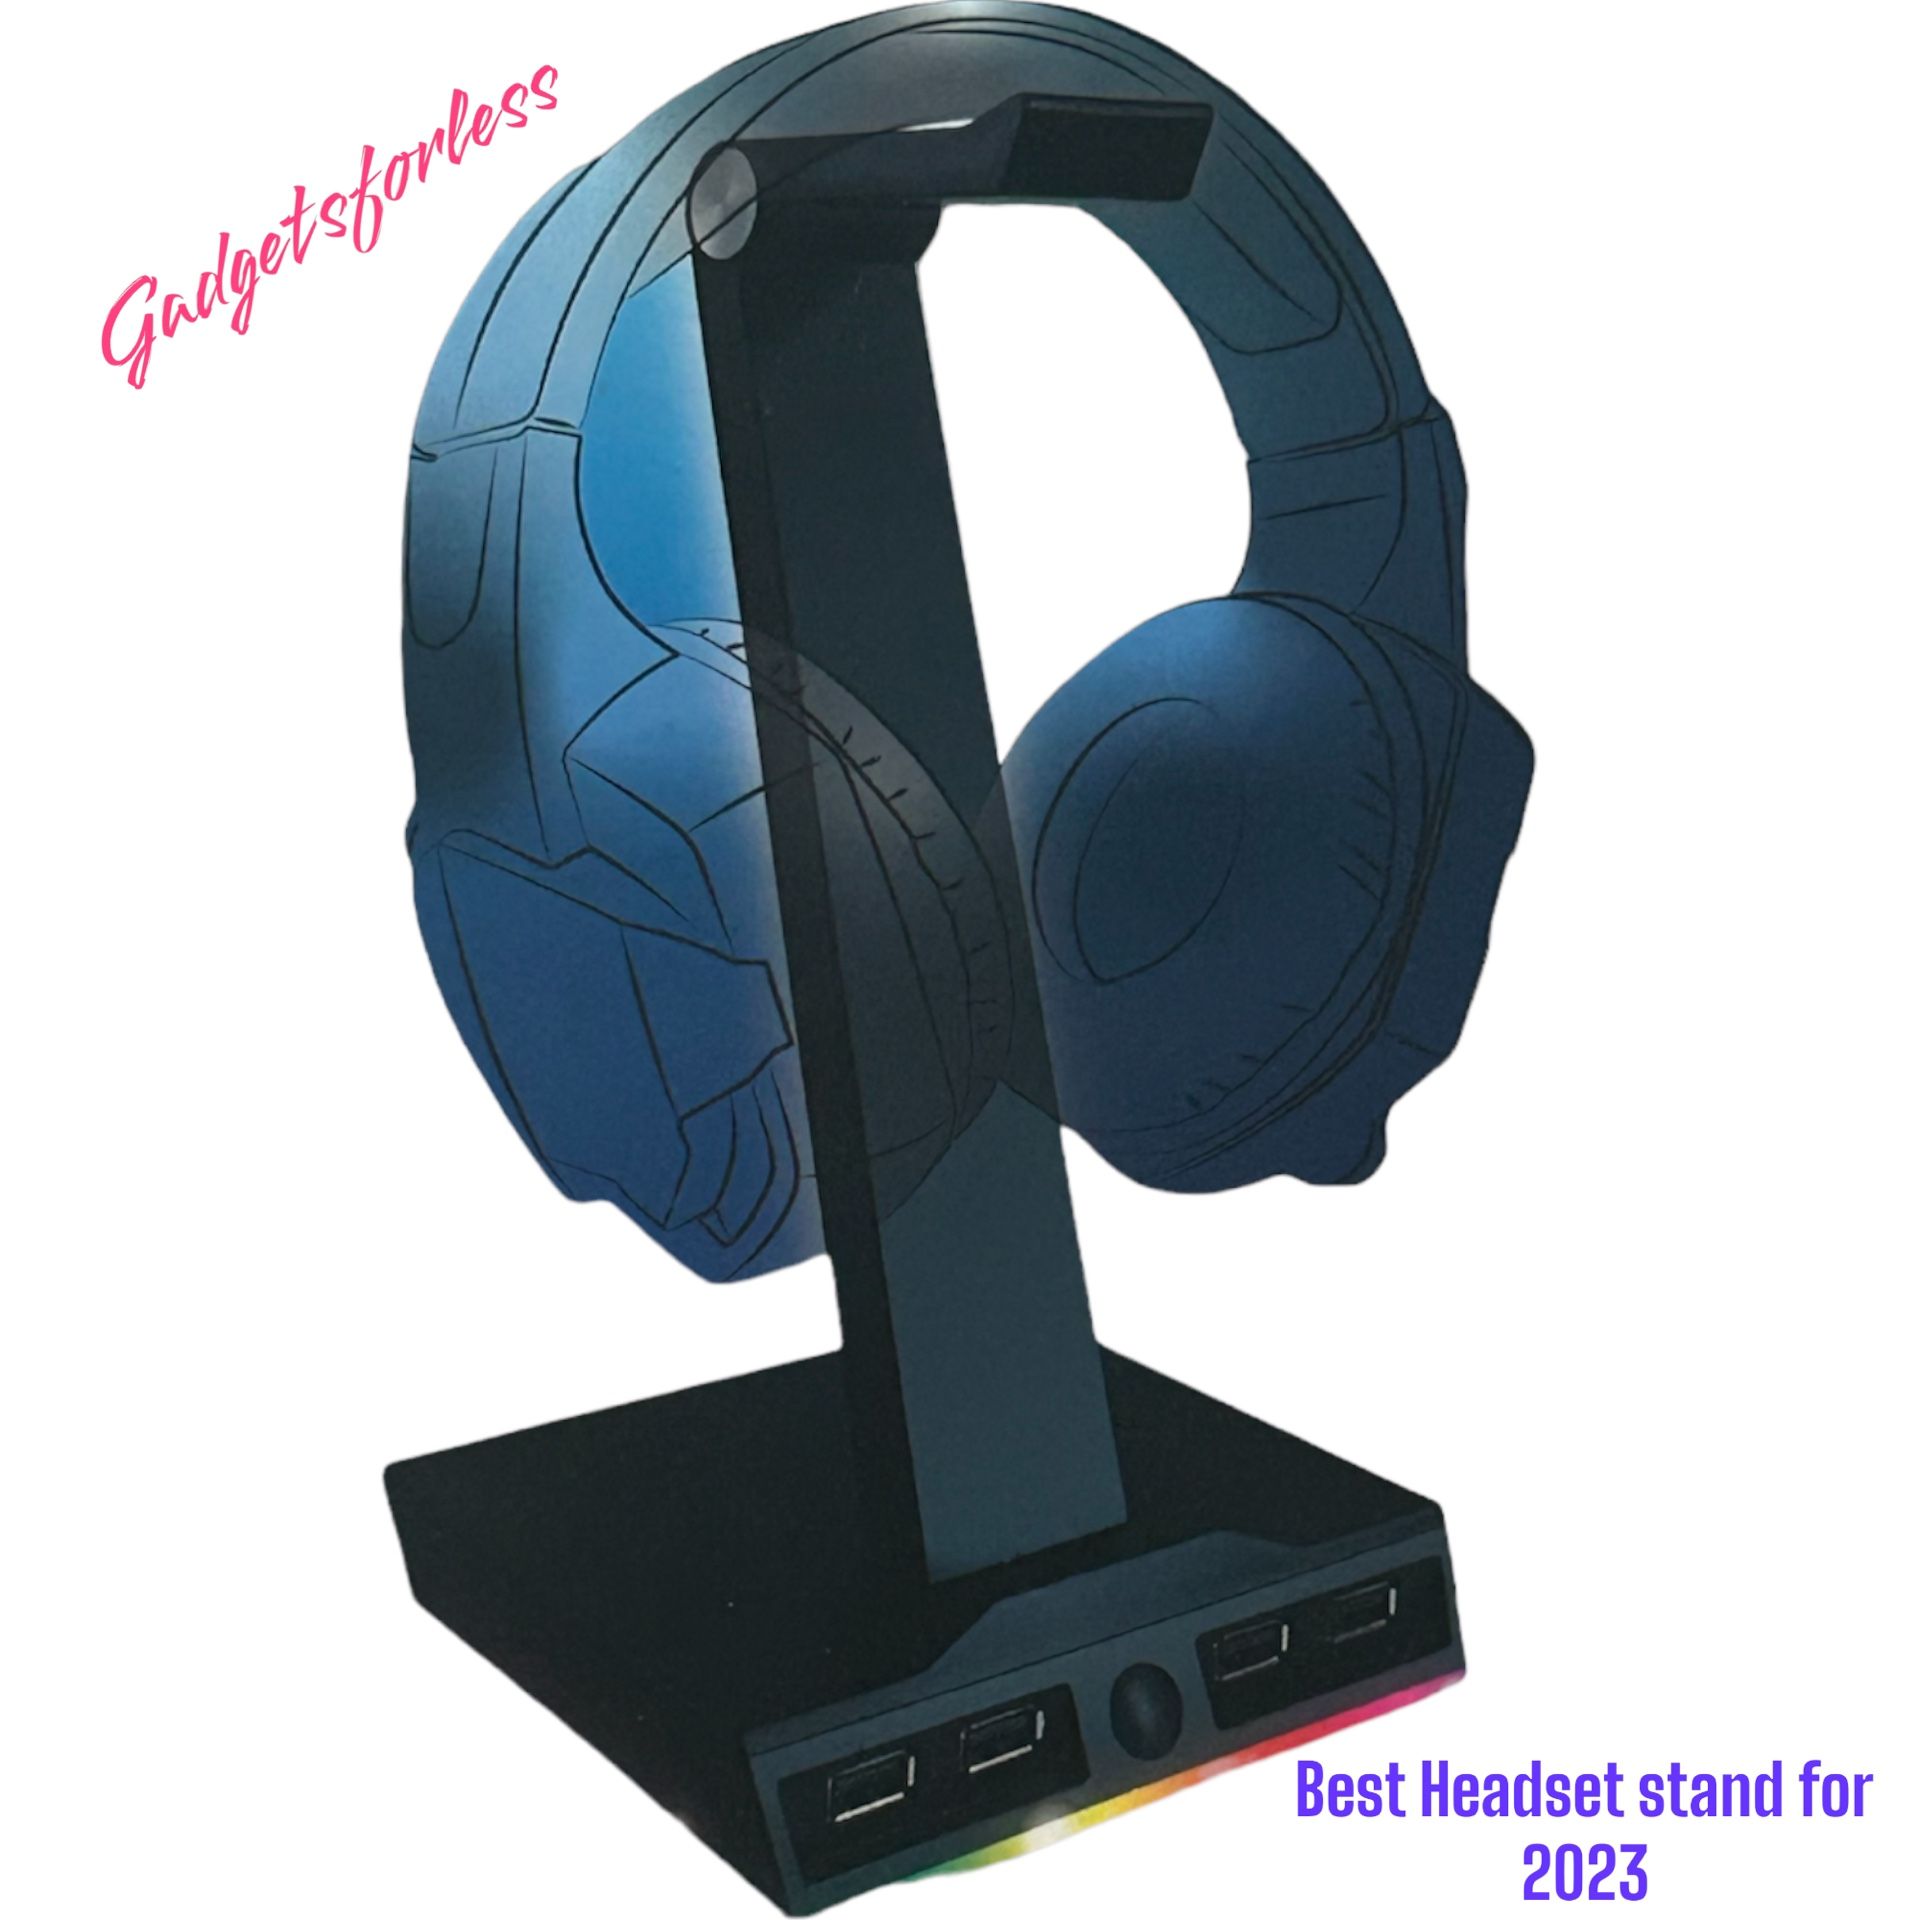 Gadgetsforless Gaming Headset Stand With 4 USB Ports 